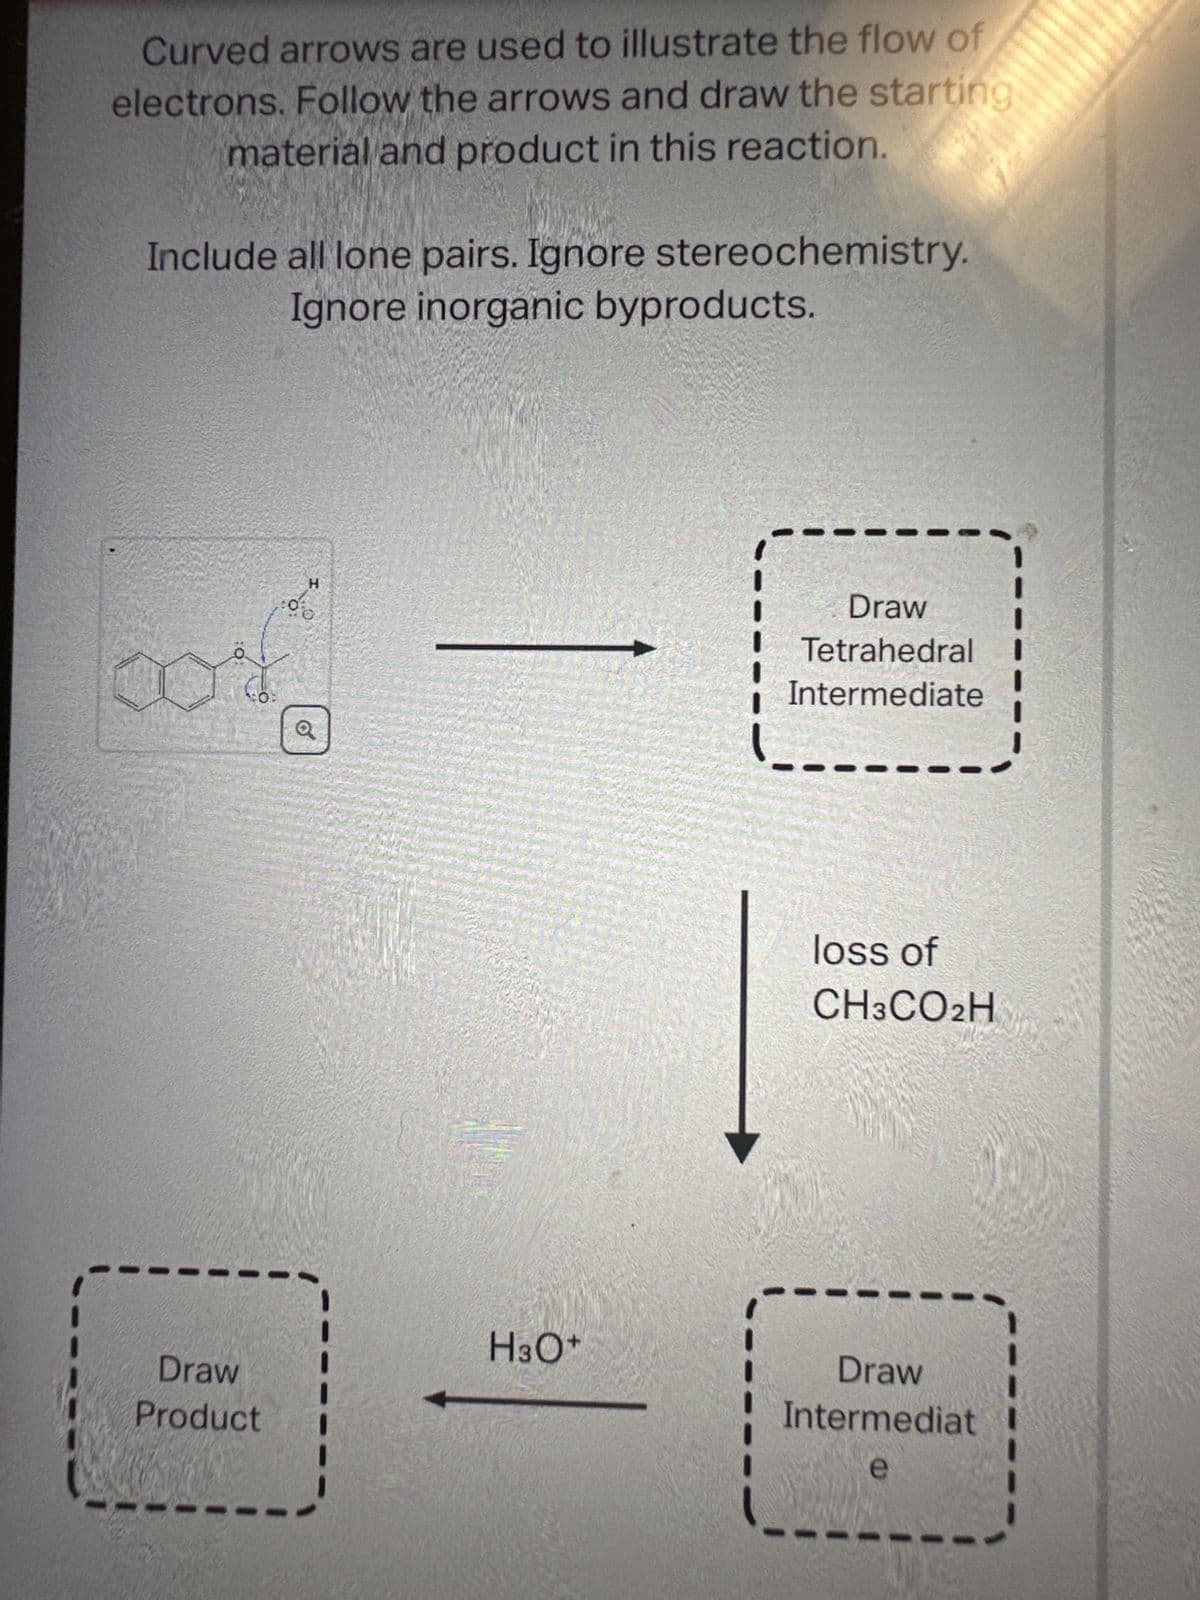 Curved arrows are used to illustrate the flow of
electrons. Follow the arrows and draw the starting
material and product in this reaction.
Include all lone pairs. Ignore stereochemistry.
Ignore inorganic byproducts.
Draw
Product
H
0%
H3O+
Draw
Tetrahedral
Intermediate
loss of
CH3CO2H
Draw
Intermediat
e